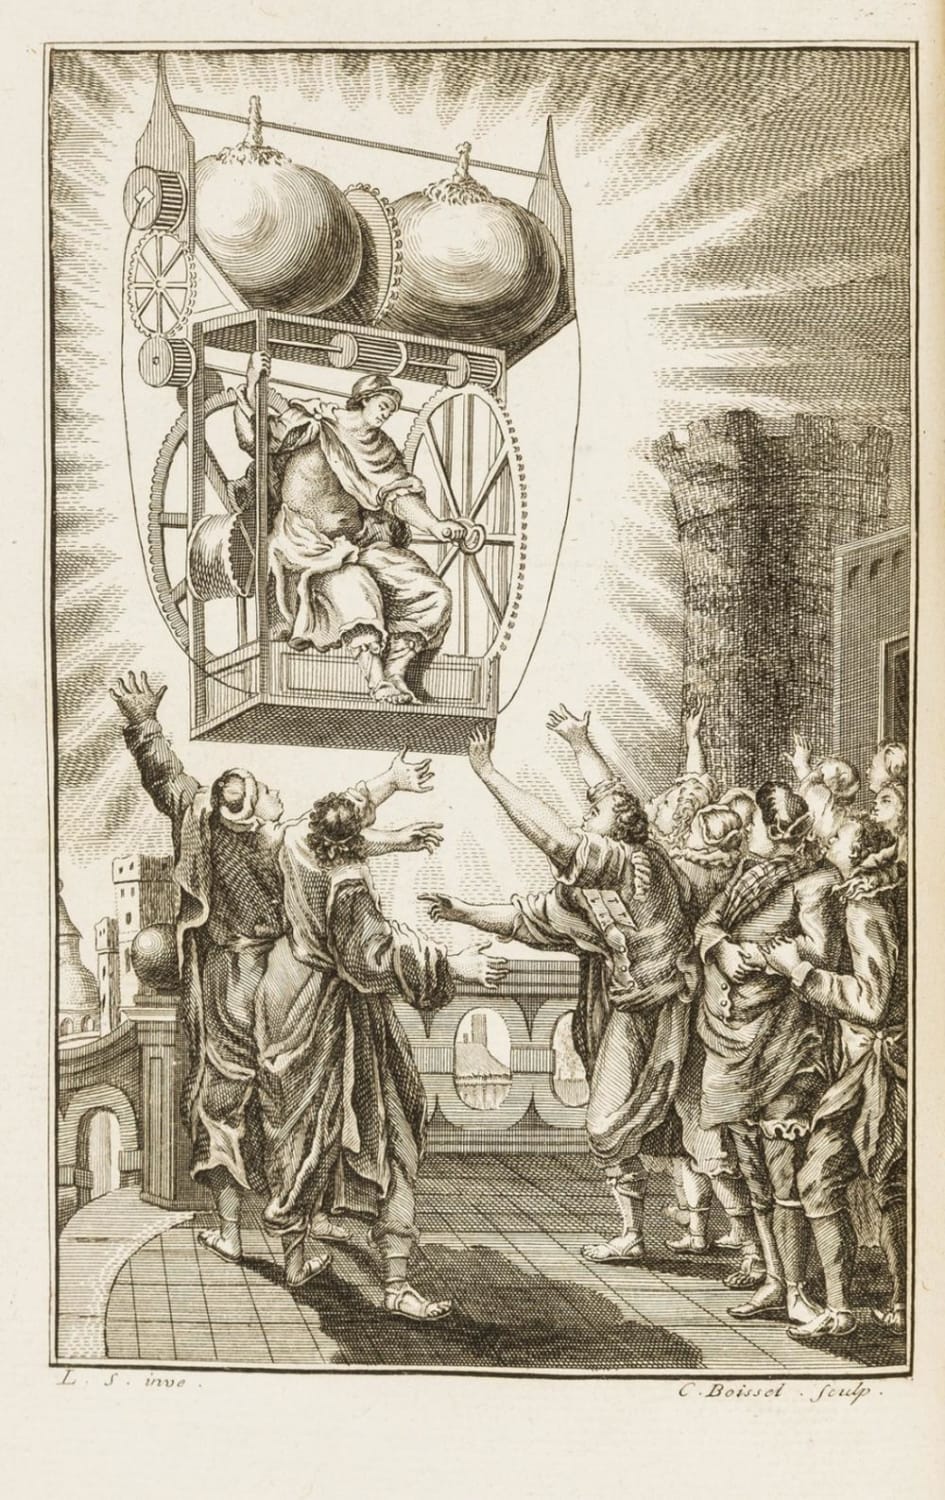 Depiction of a flying machine powered by static electricity, from “The Unpretentious Philosopher” - 1775